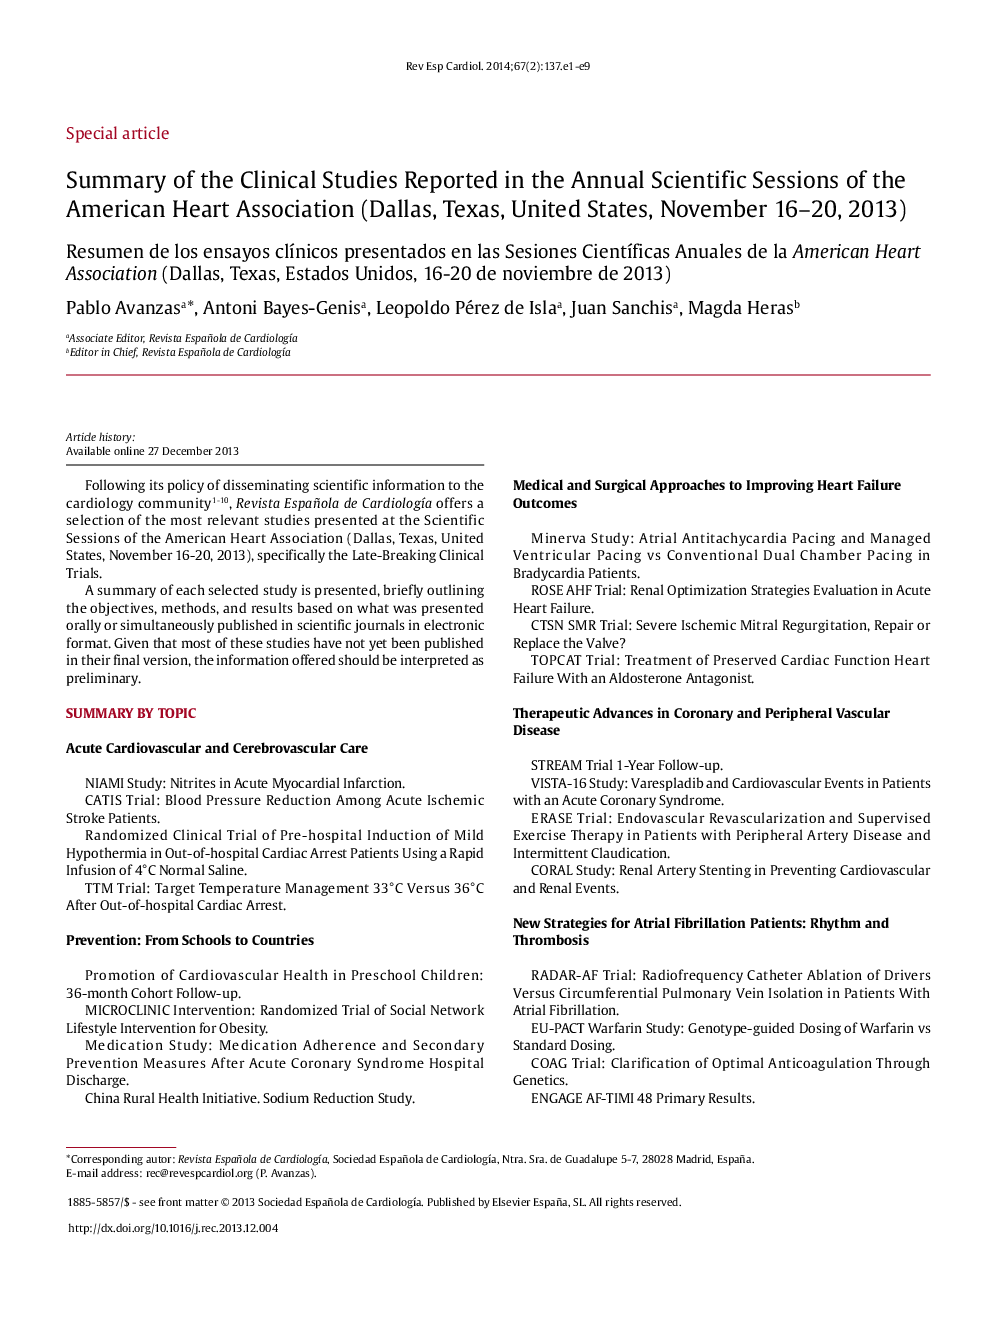 Summary of the Clinical Studies Reported in the Annual Scientific Sessions of the American Heart Association (Dallas, Texas, United States, November 16-20, 2013)